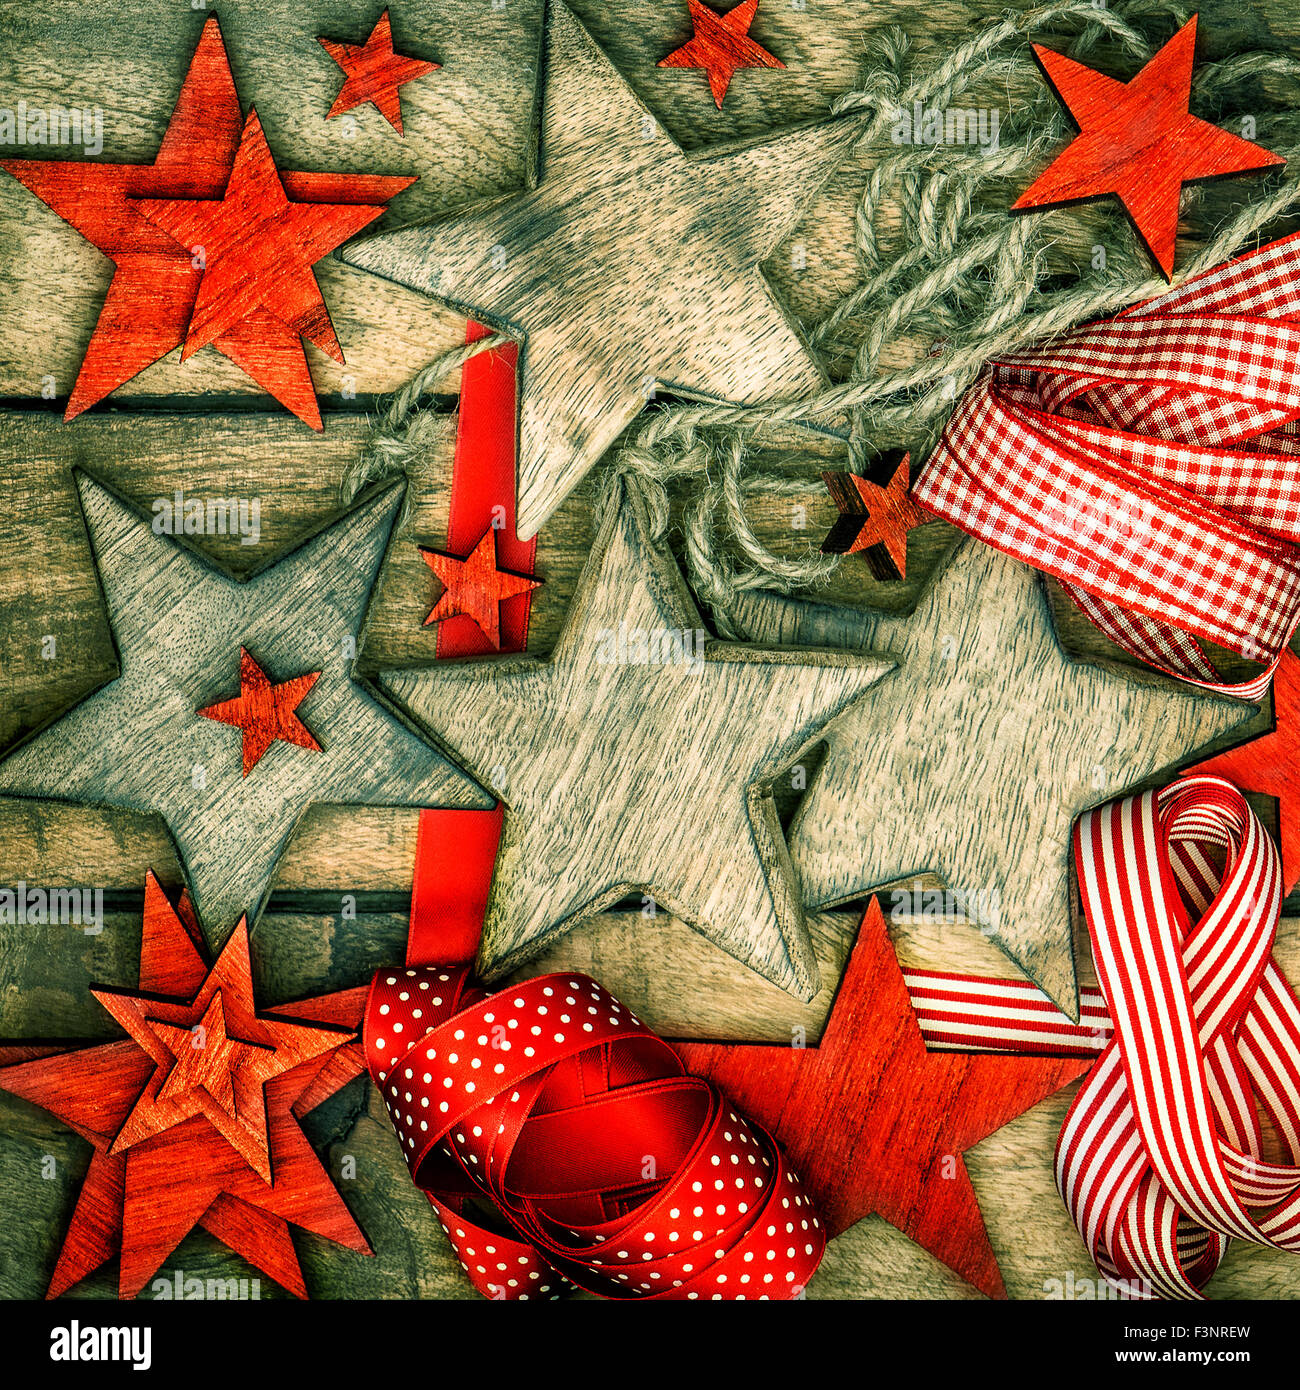 Christmas decorations wooden stars and red ribbons. Nostalgic retro style picture. Dark designed photo Stock Photo